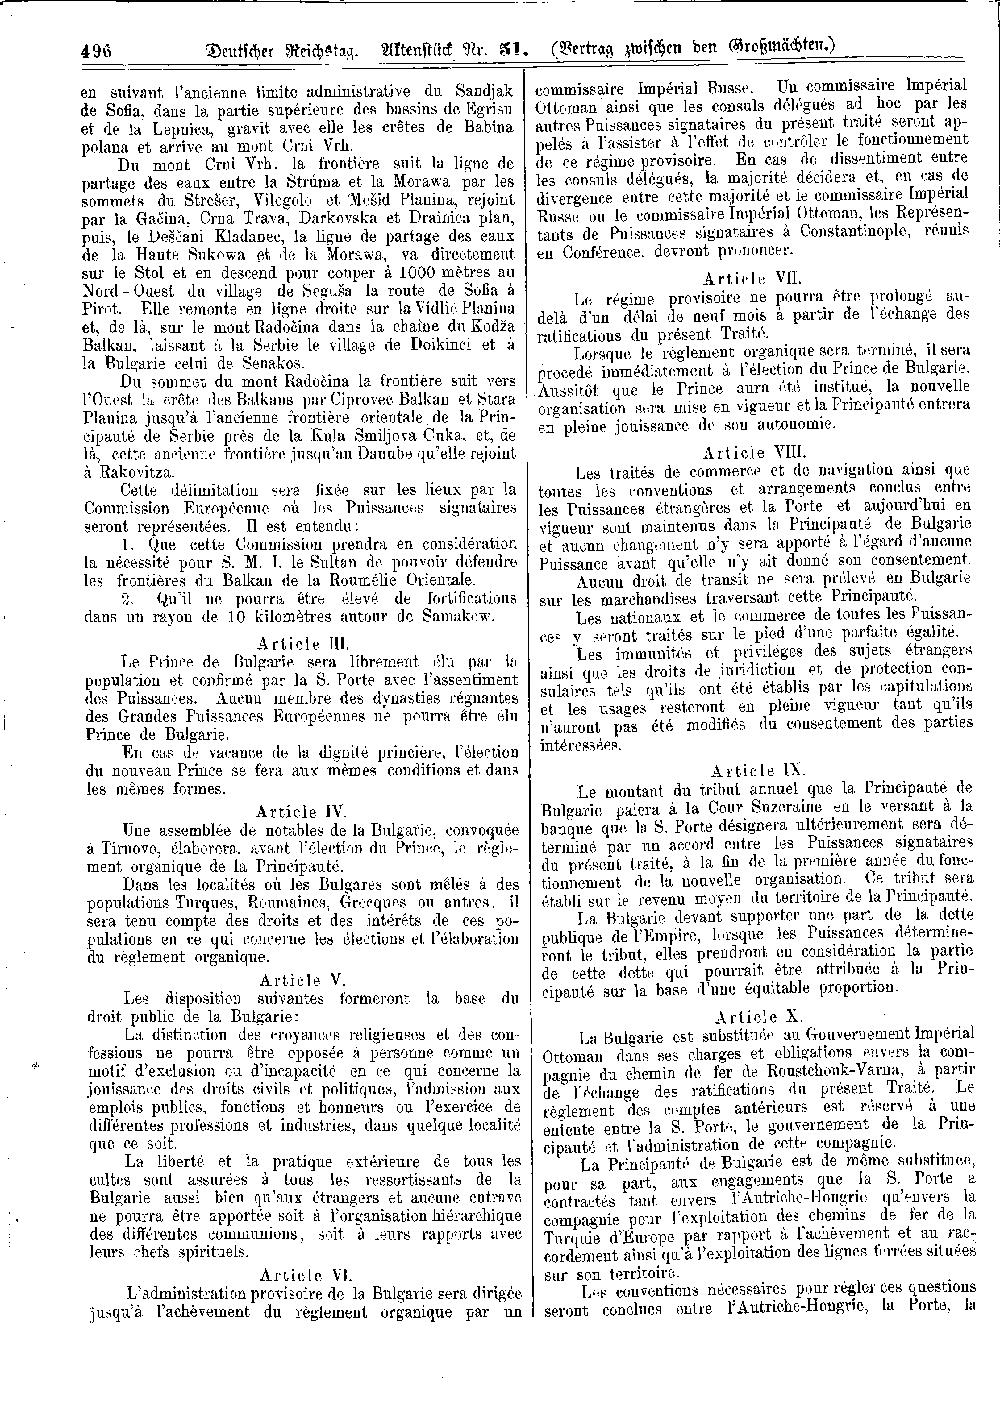 Scan of page 496